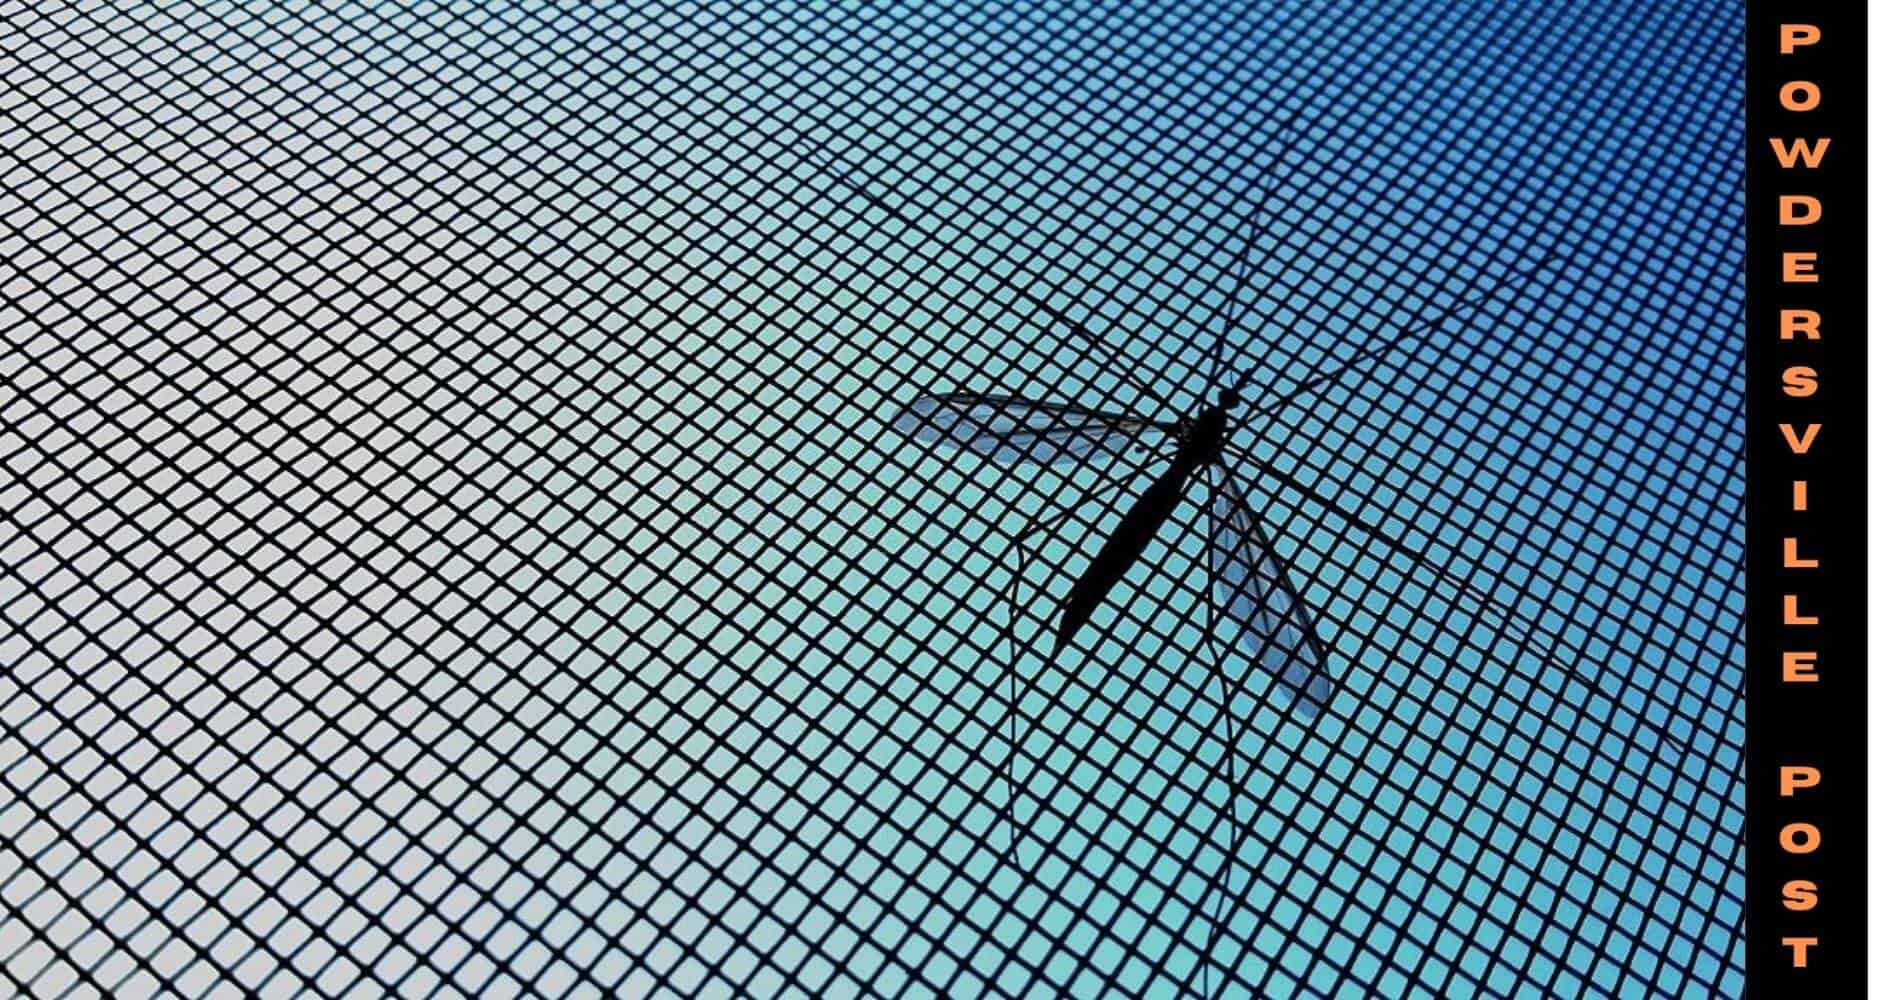 Inexpensive Mosquito Nets Prevent 40% of Child Deaths From Malaria